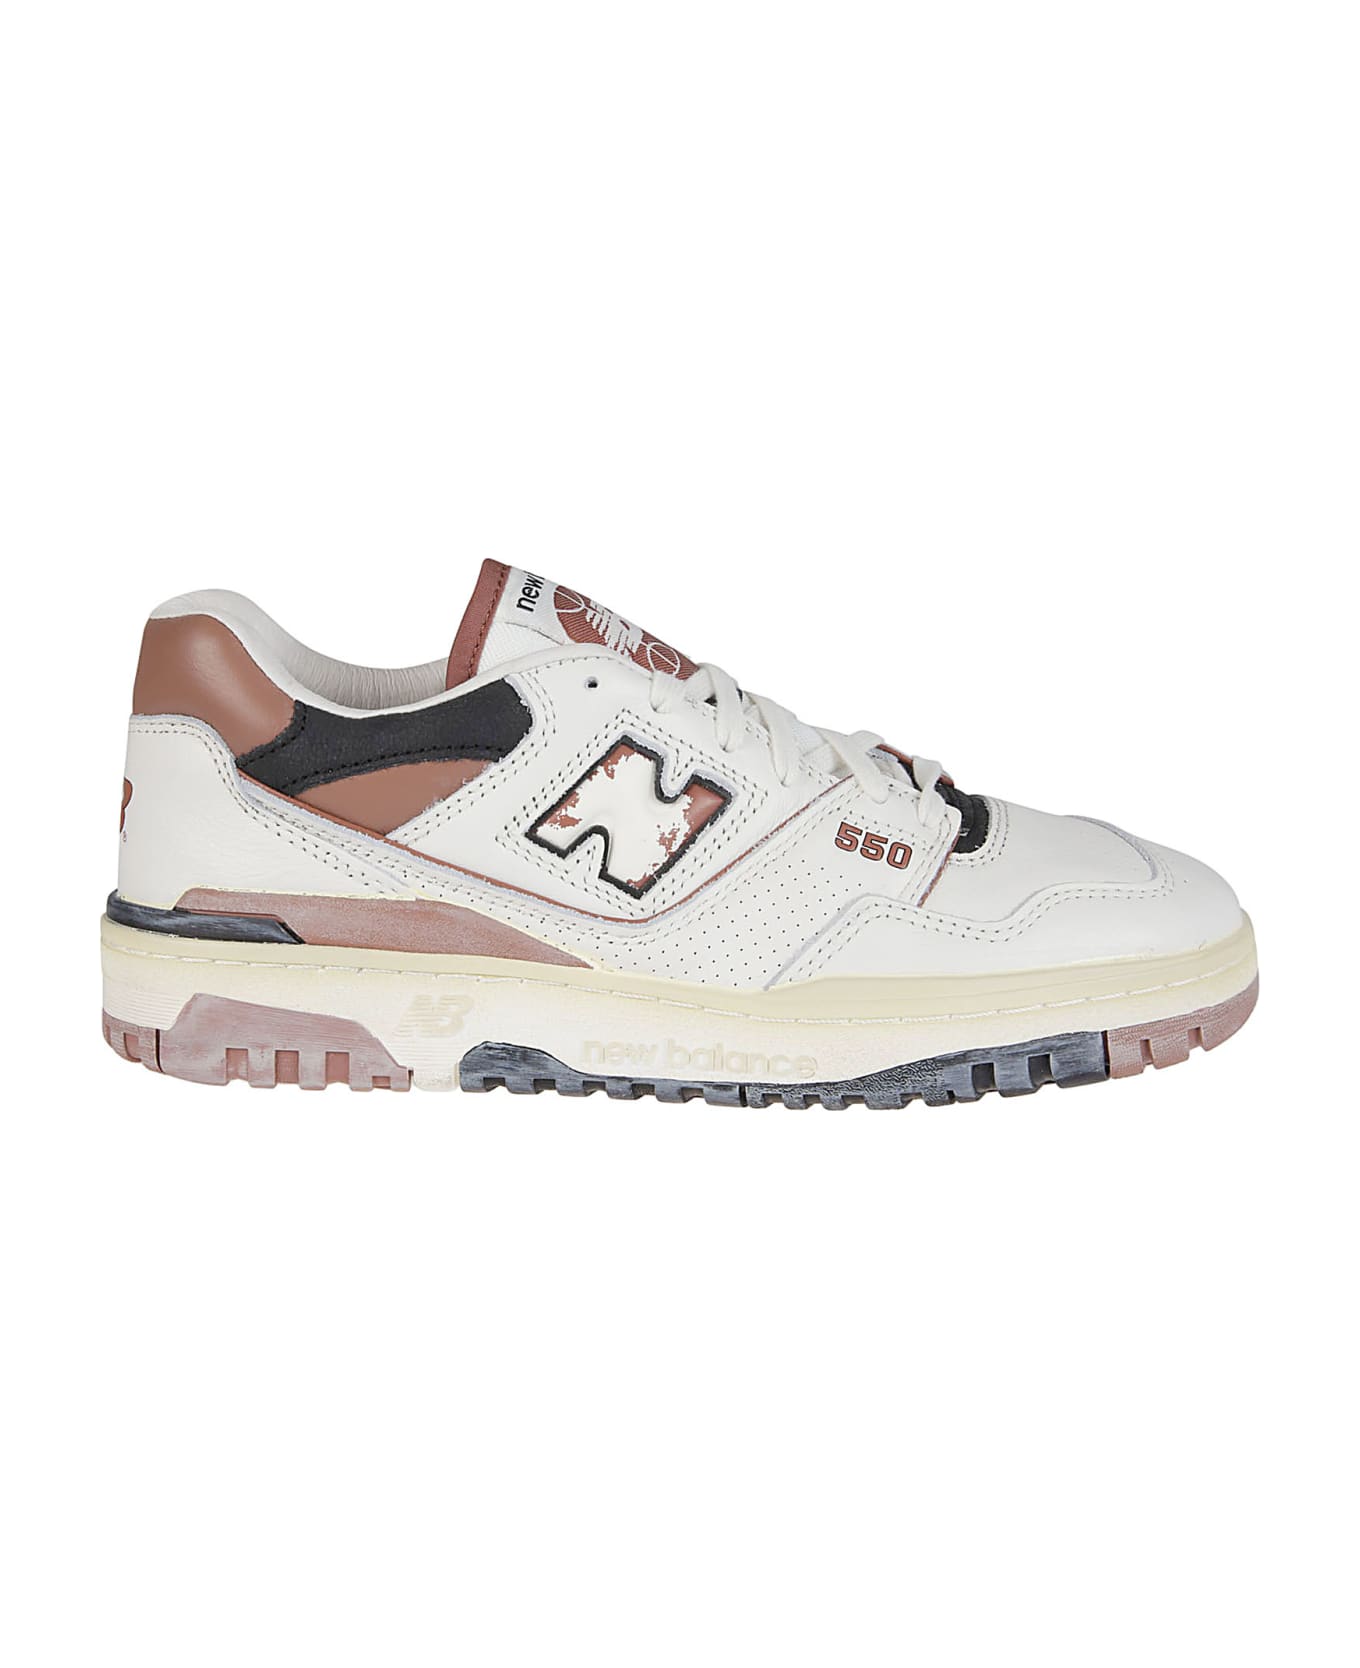 New Balance 550 Sneakers - Off White/brown スニーカー